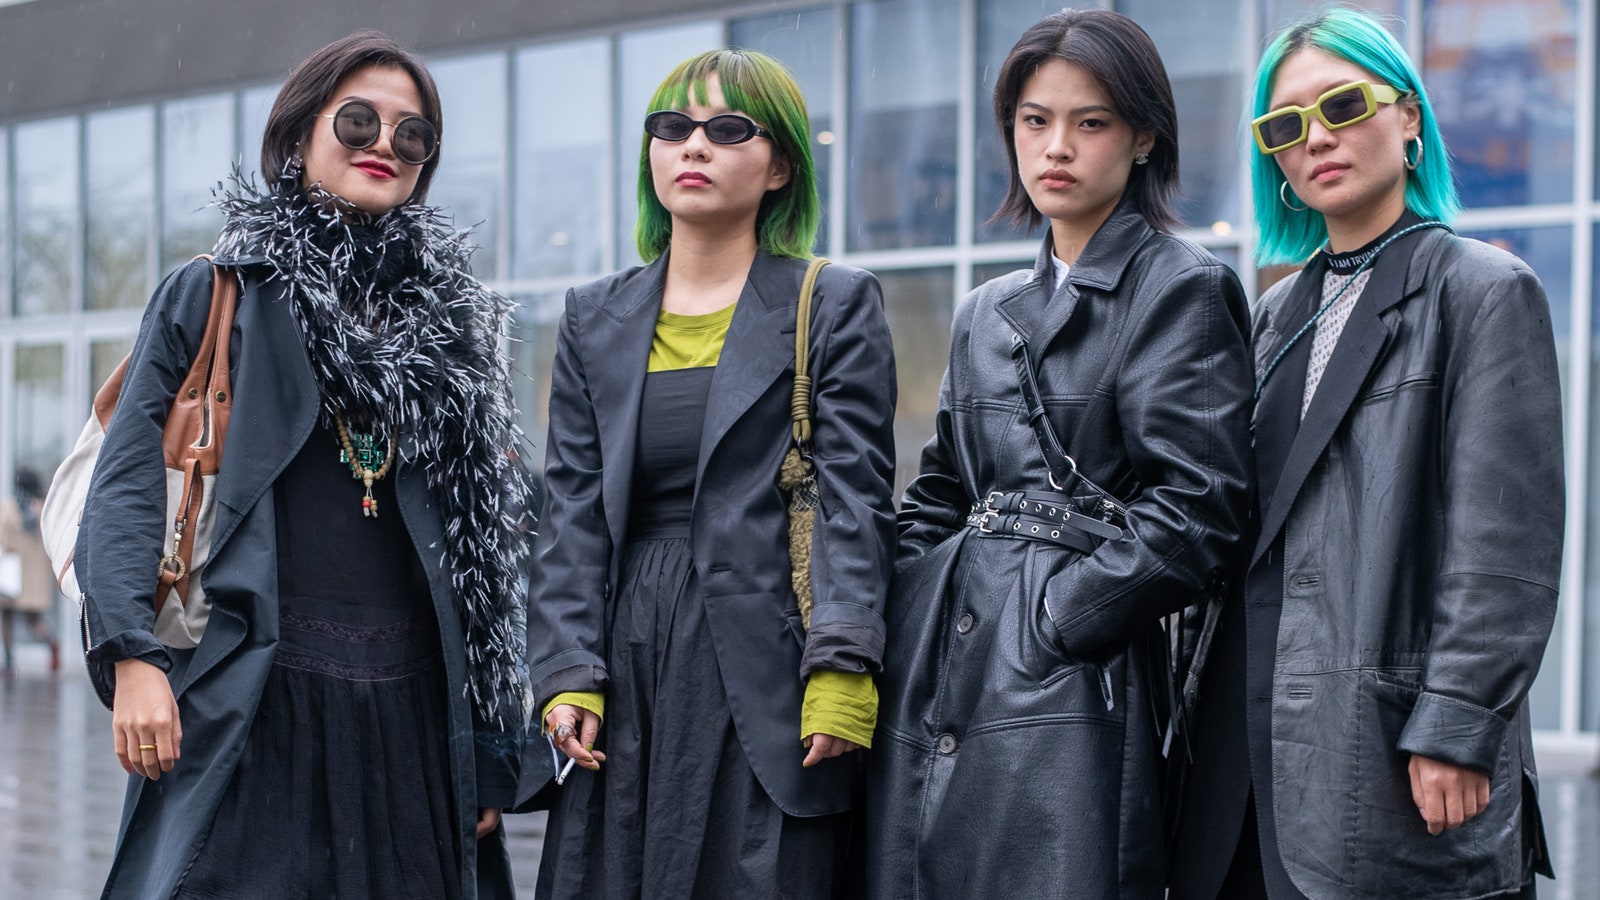 The Best Street Style at Shanghai Fashion Week Fall 2021